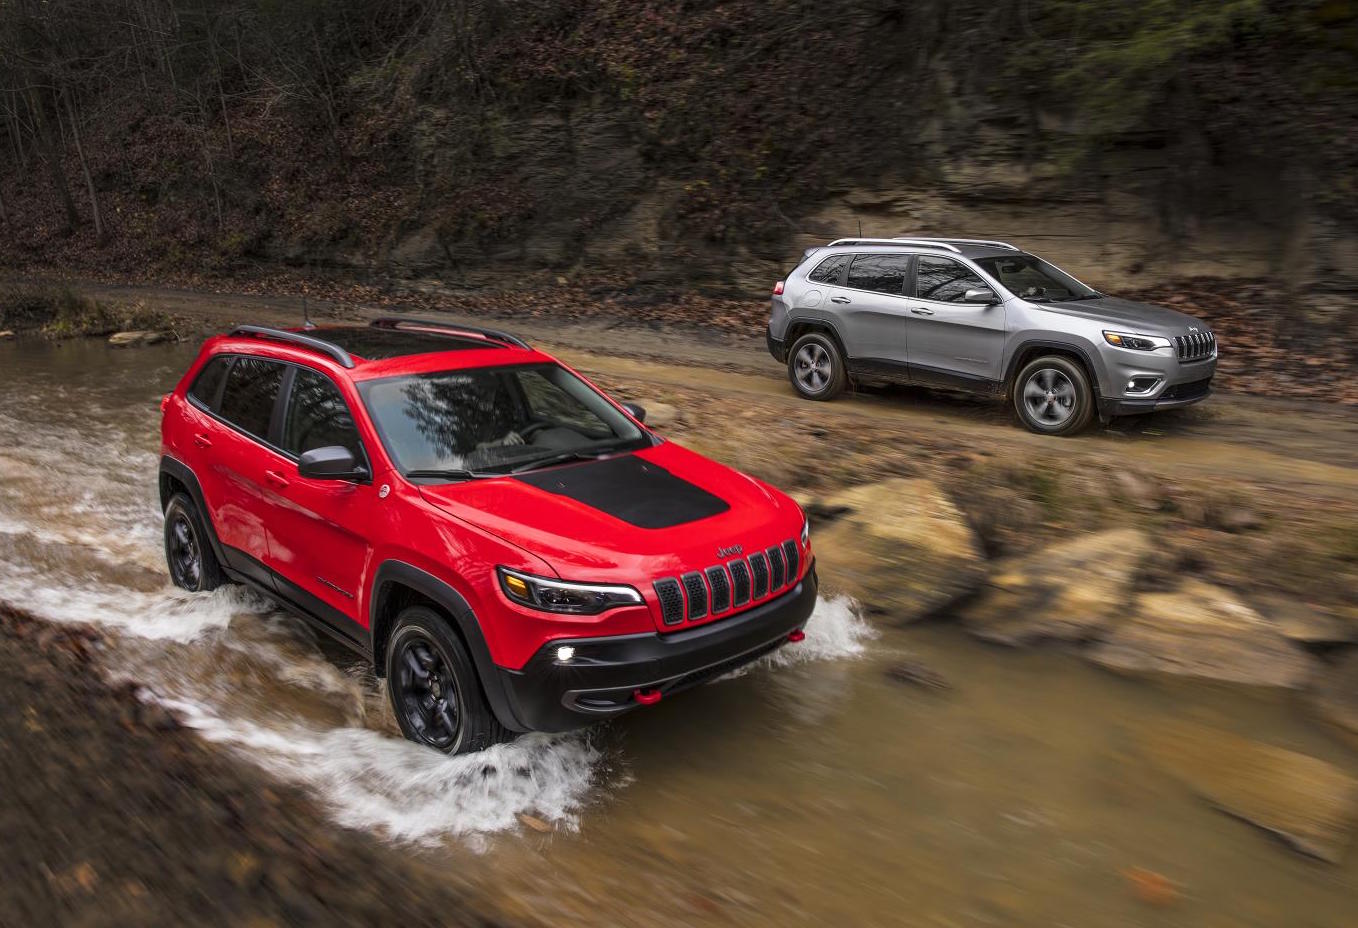 2019 Jeep Cherokee debuts at Detroit, 2.0 turbo confirmed